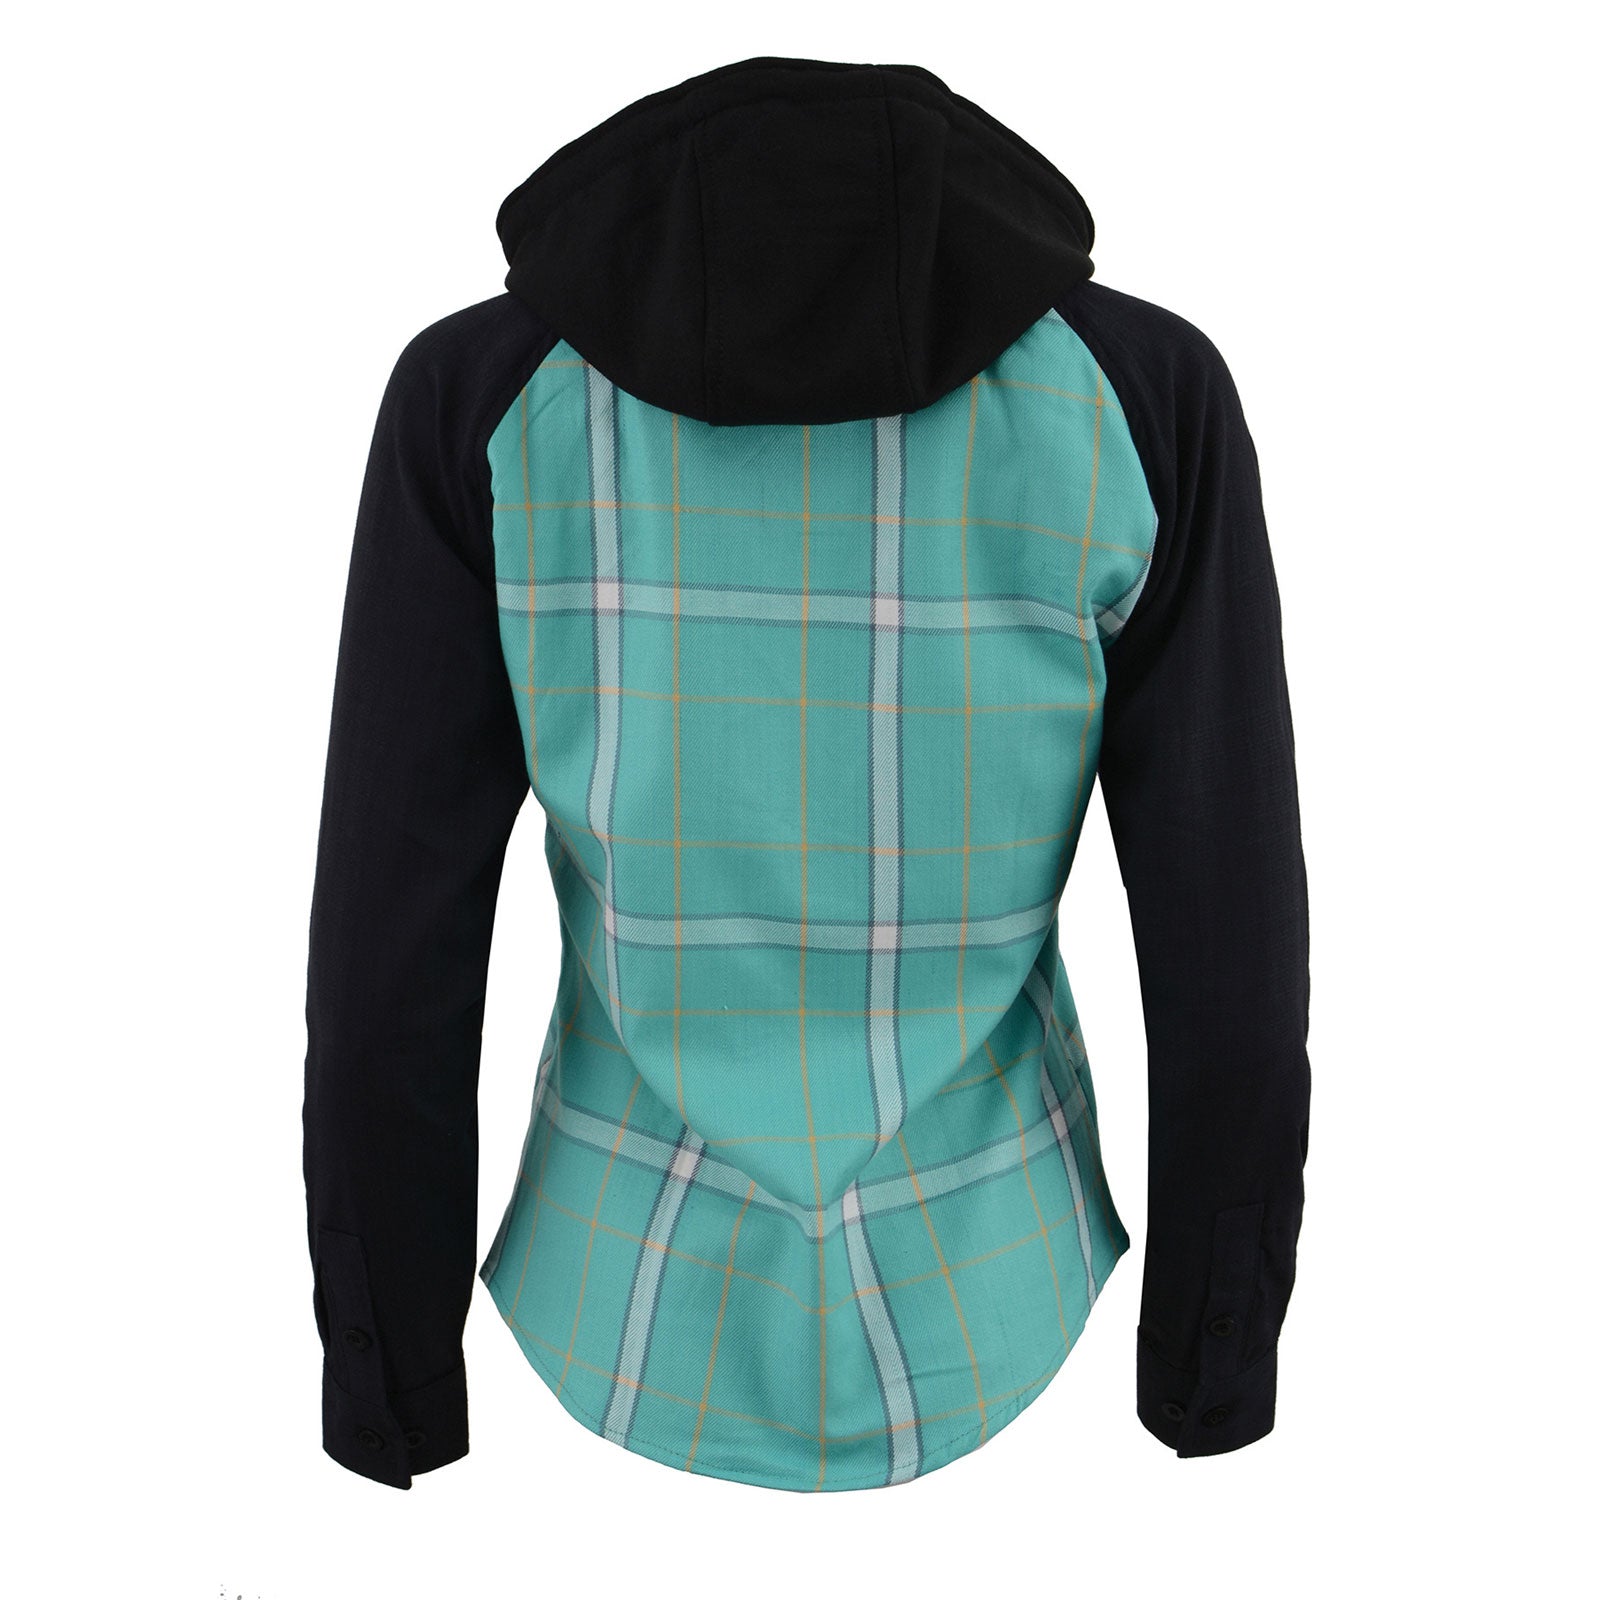 NexGen MNG21601 Women's Casual Black and Teal Long Sleeve Cotton Flannel Shirt with Hoodie